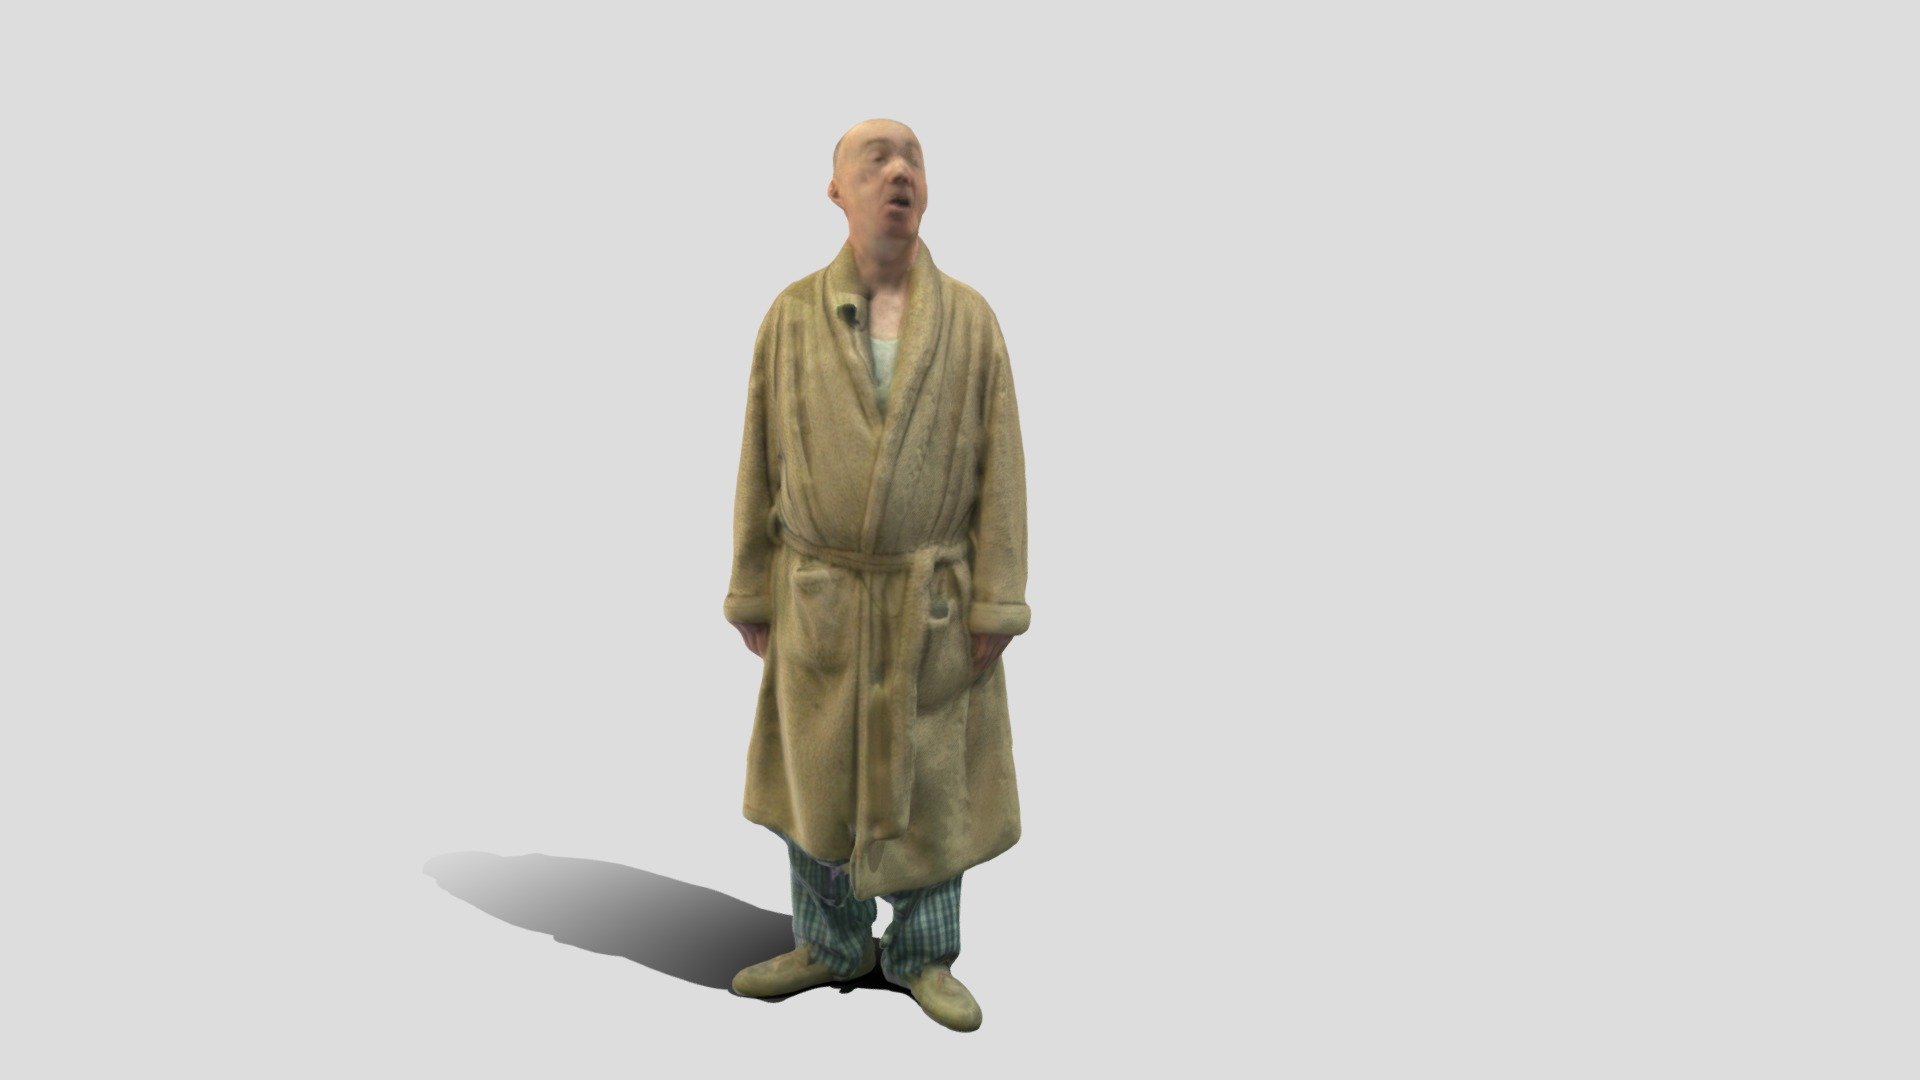 This is a single frame from a volumetric video of Buck Mulligan (Paul O'Hanrahan) for a recreation of the opening scene of Jame Joyce's Ulysses. A description of the project and a video trailer of the scene are available here: https://v-sense.scss.tcd.ie/research/mixed-reality-ulysses/ - Buck Mulligan - 3D model by V-SENSE (@V-sense2020) 3d model